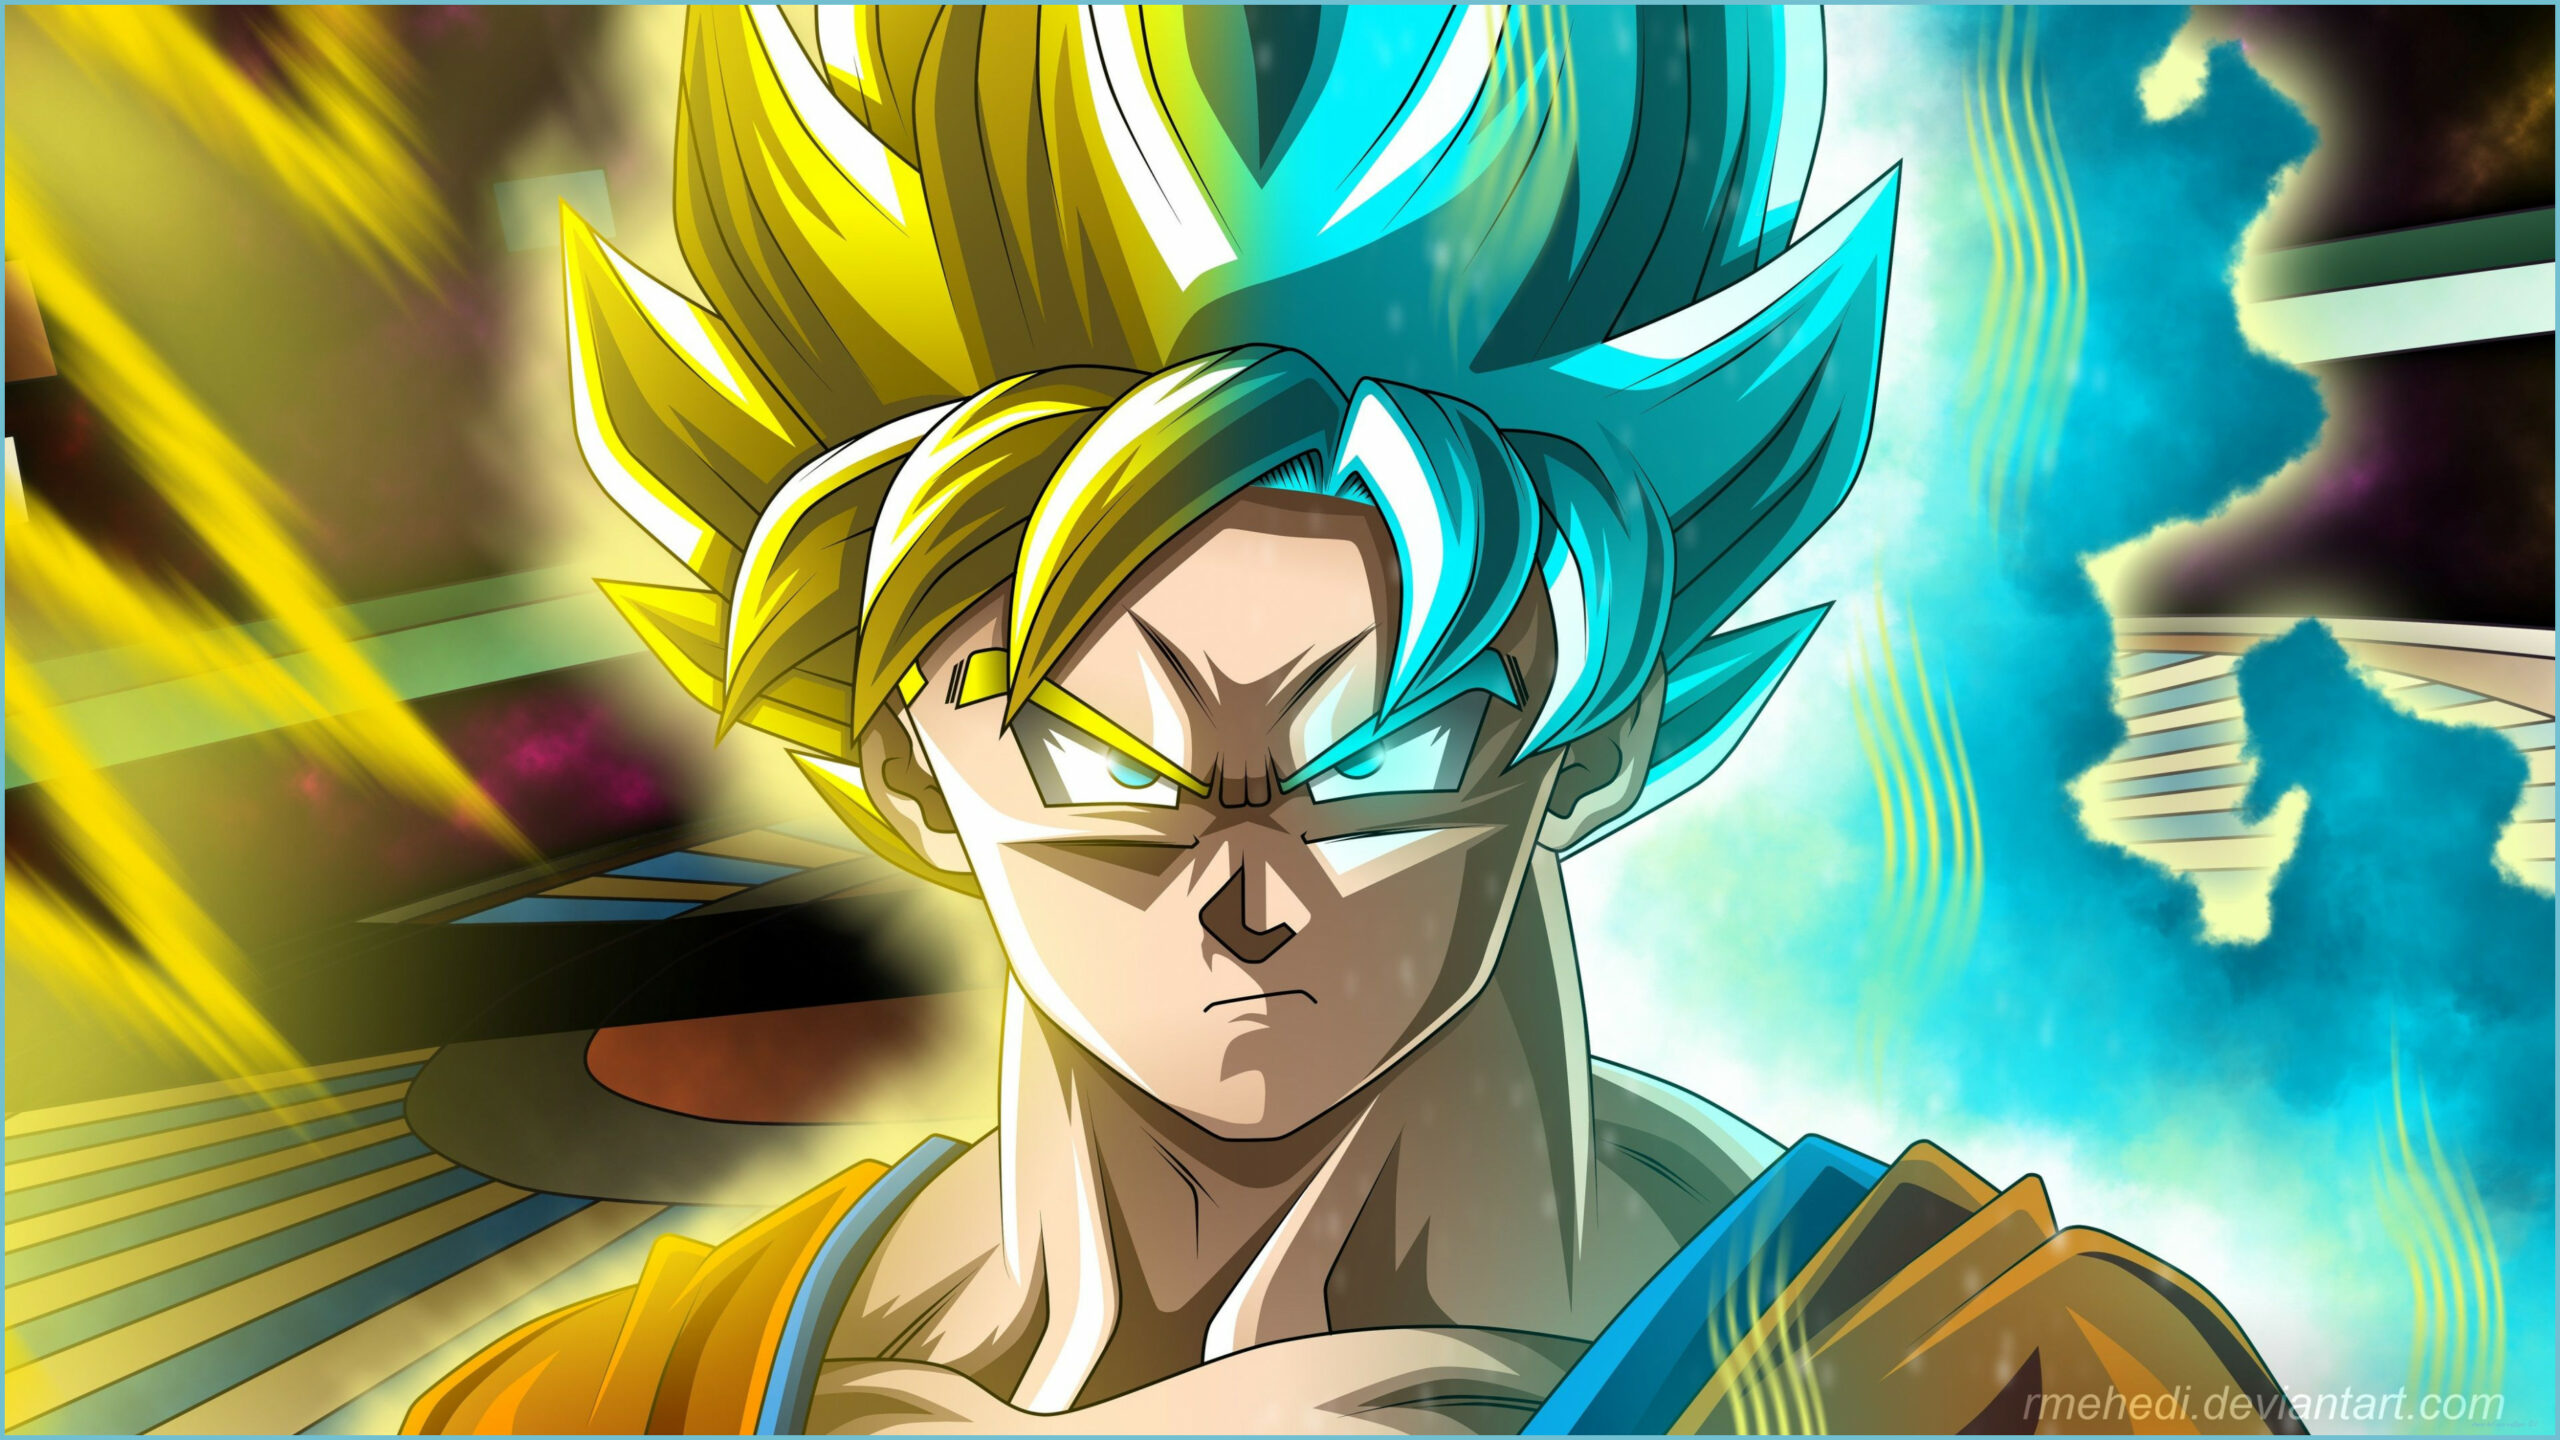 Exciting Parts Of Attending Dragon Ball Super Wallpaper 8k. Dragon Ball Super Wallpaper 8k